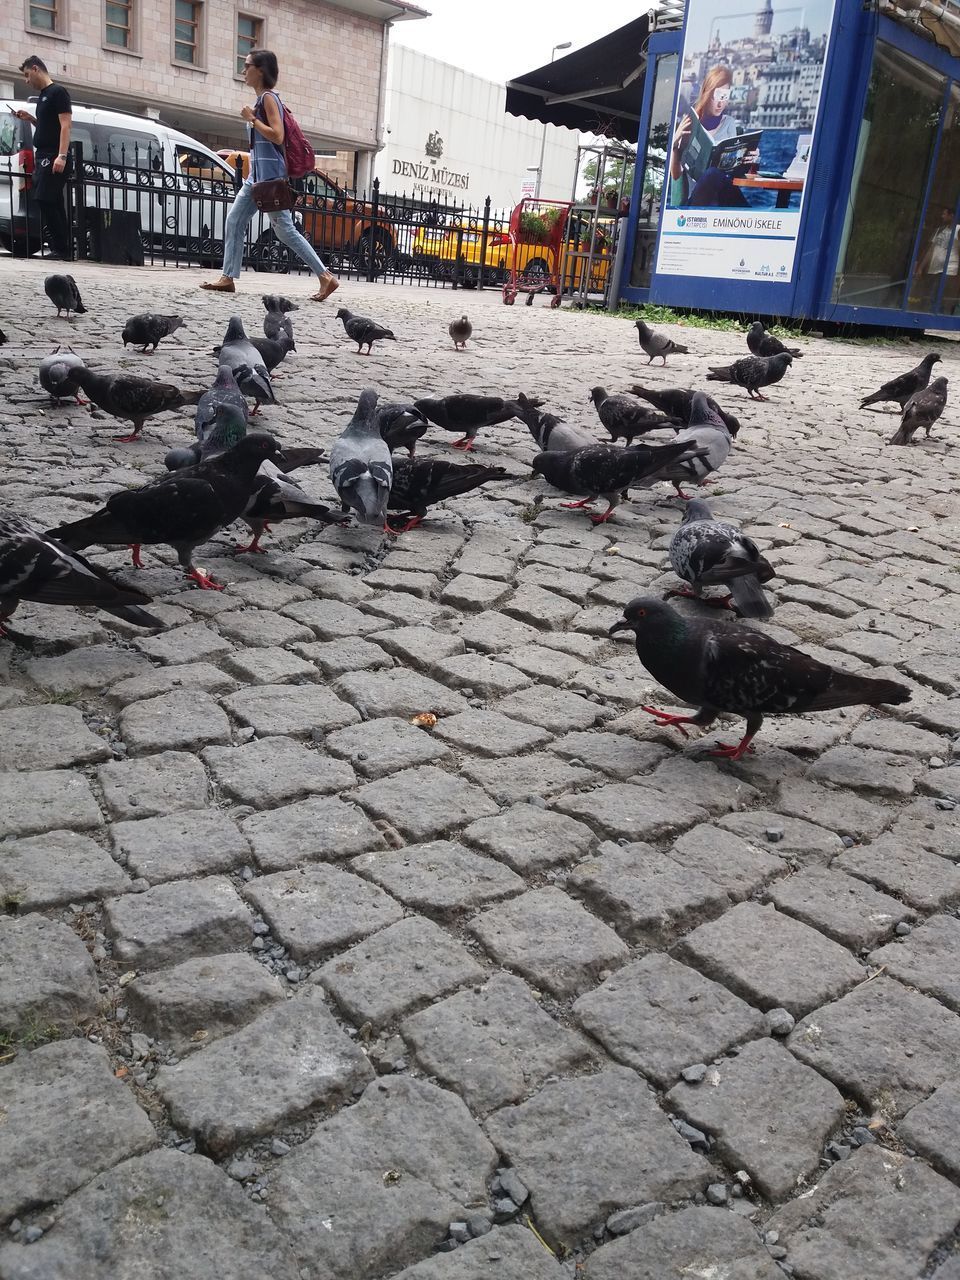 VIEW OF PIGEONS ON FOOTPATH